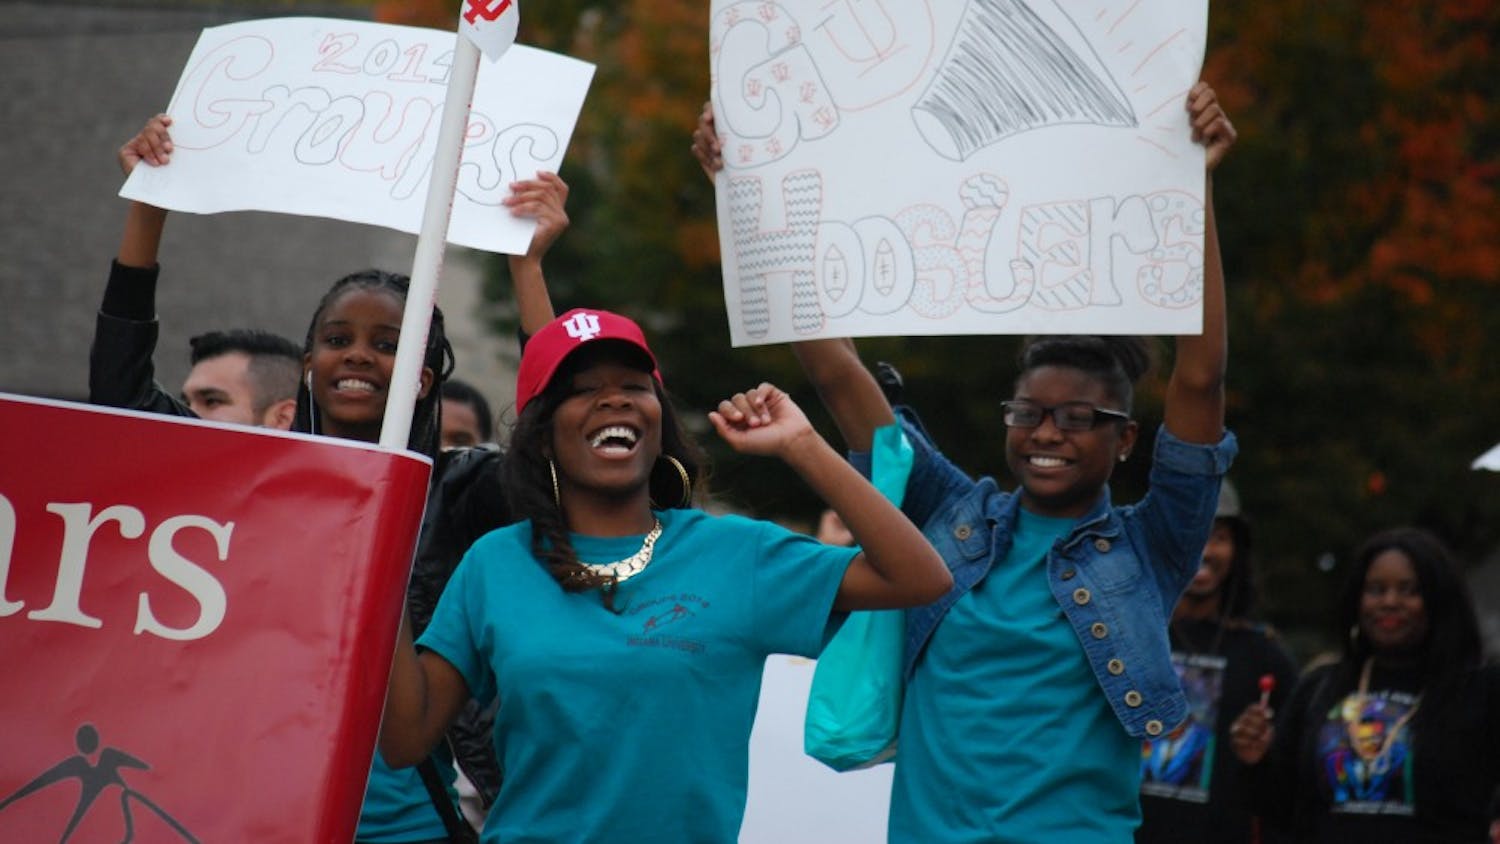 Members of the Groups Scholars Program cheer as they march along Kirkwood Avenue at the Homecoming Parade Friday.